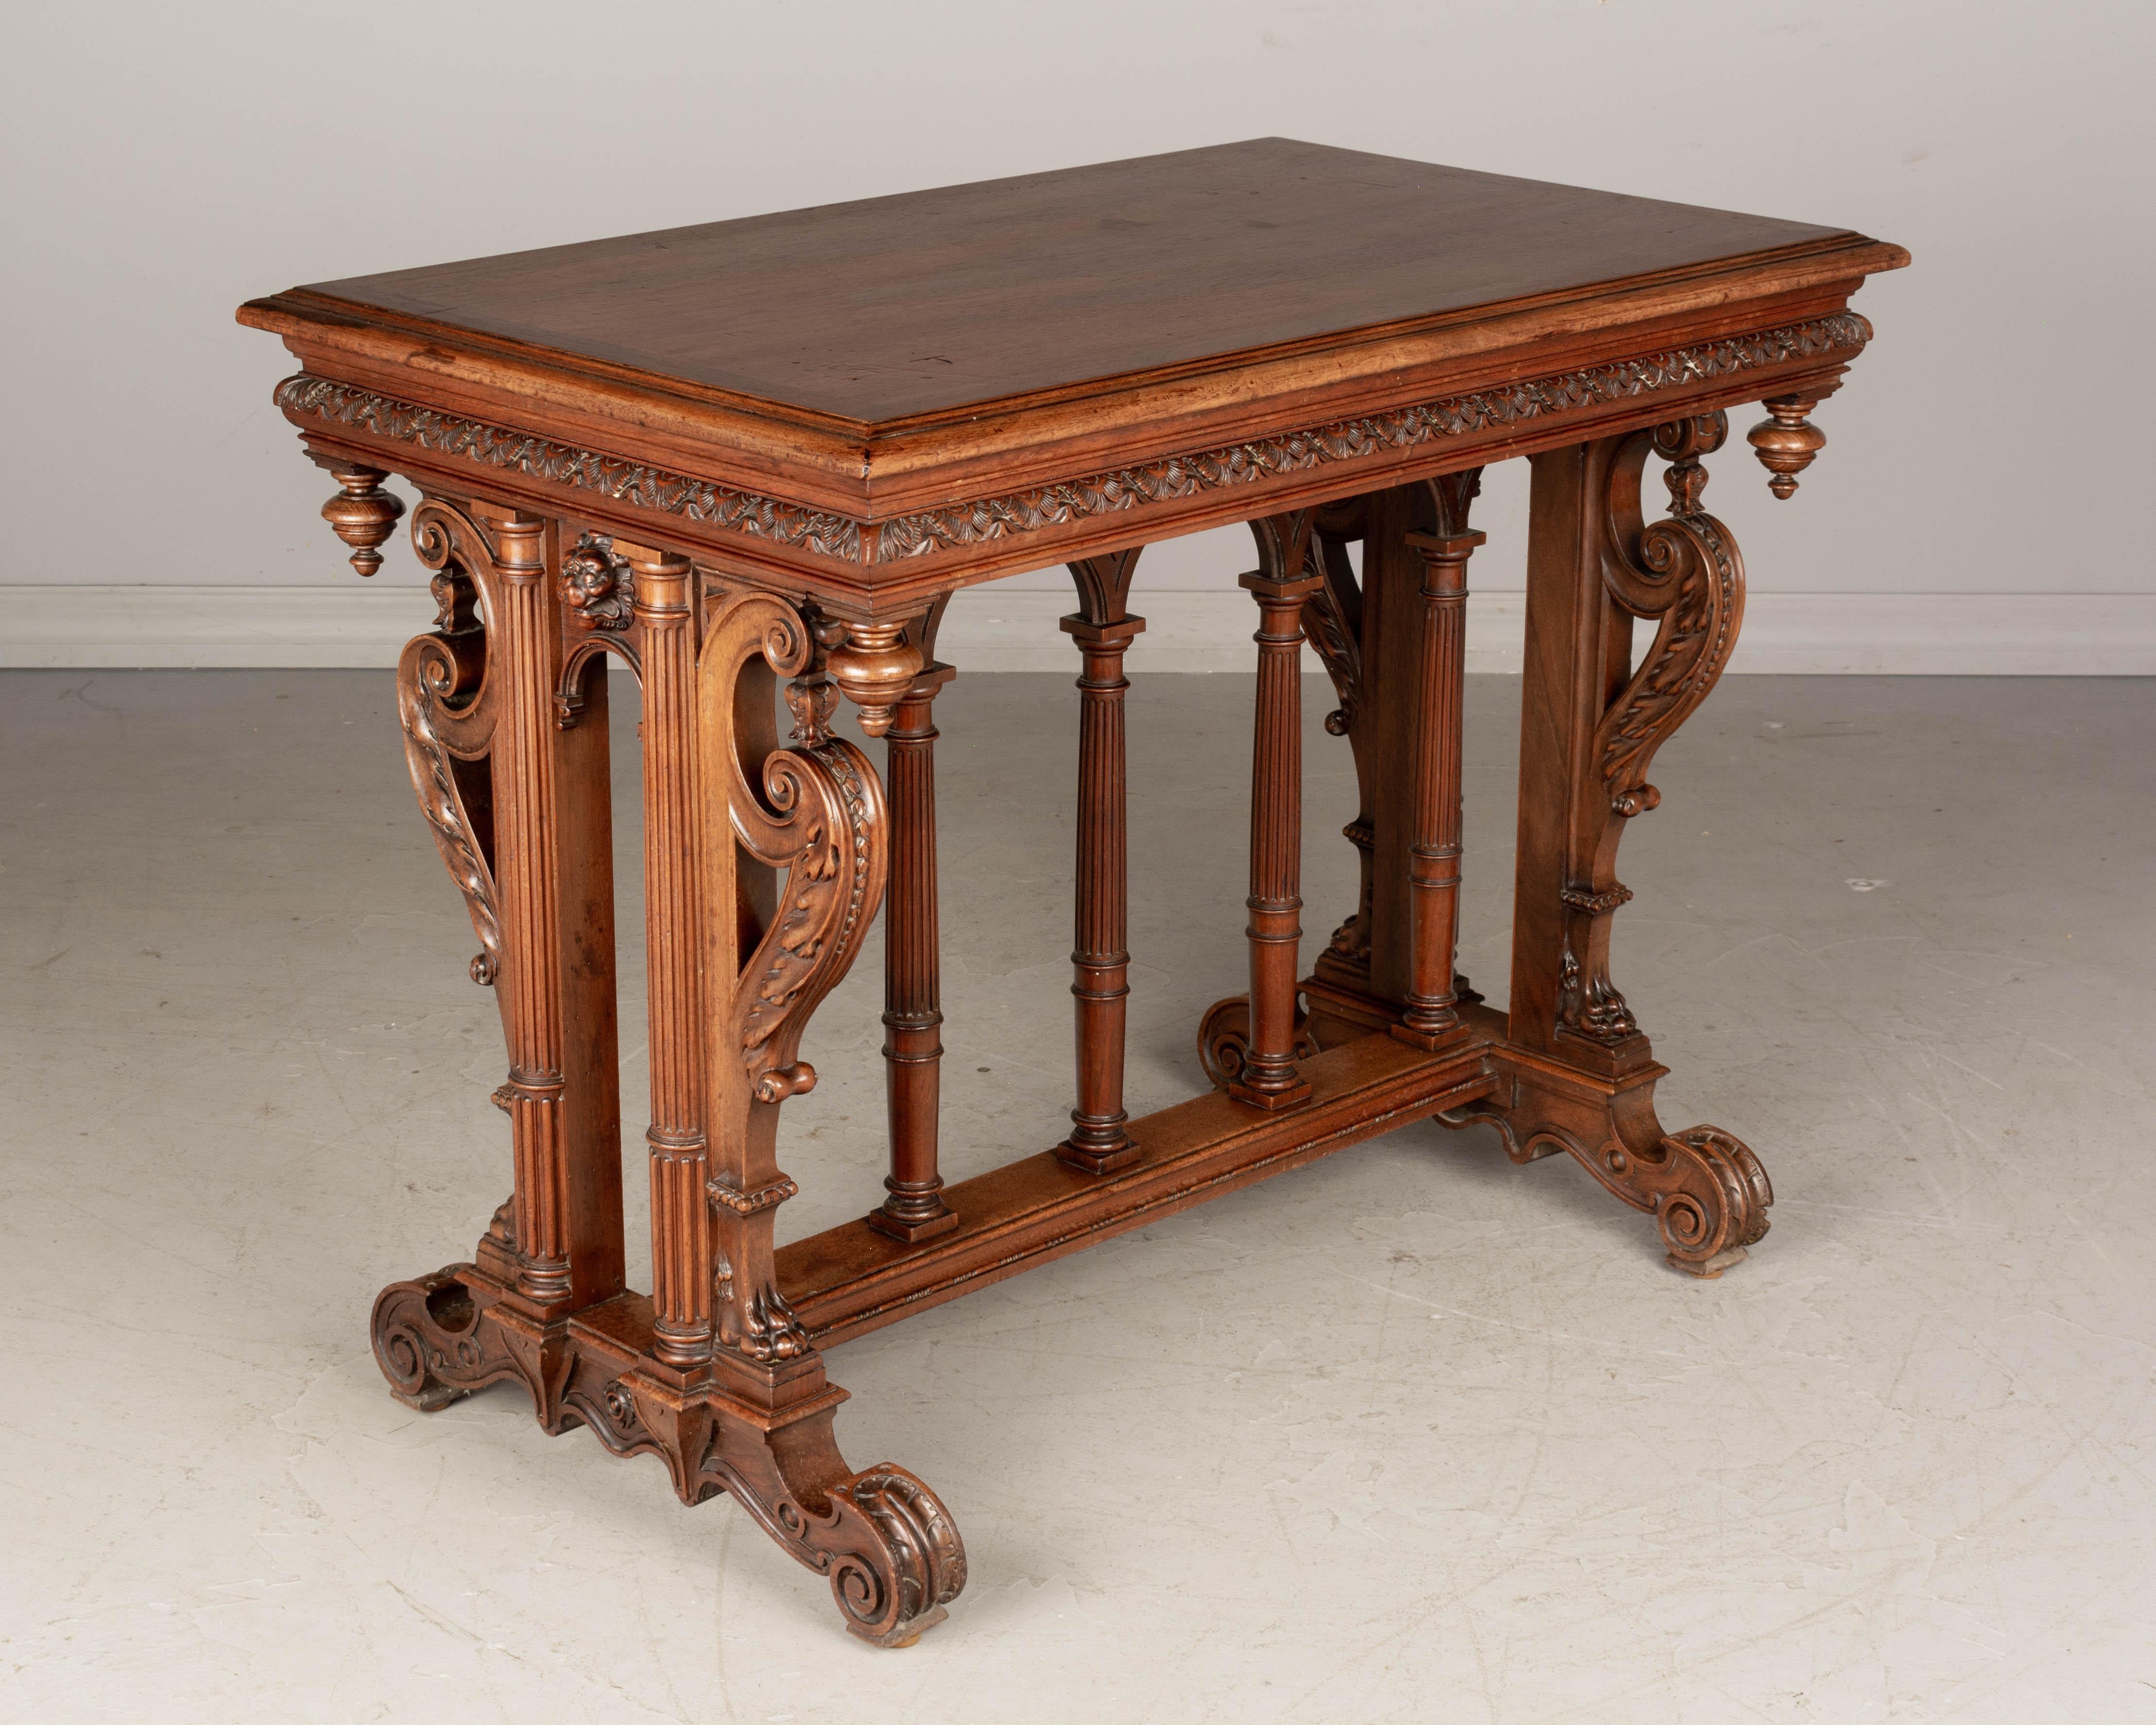 A Louis XIII style French side table made of solid hand-carved walnut. Elaborately detailed in a Neo Renaissance style with fine turned legs forming an arched colonnade over the center stretcher. Fine carvings include large scrolls with acanthus